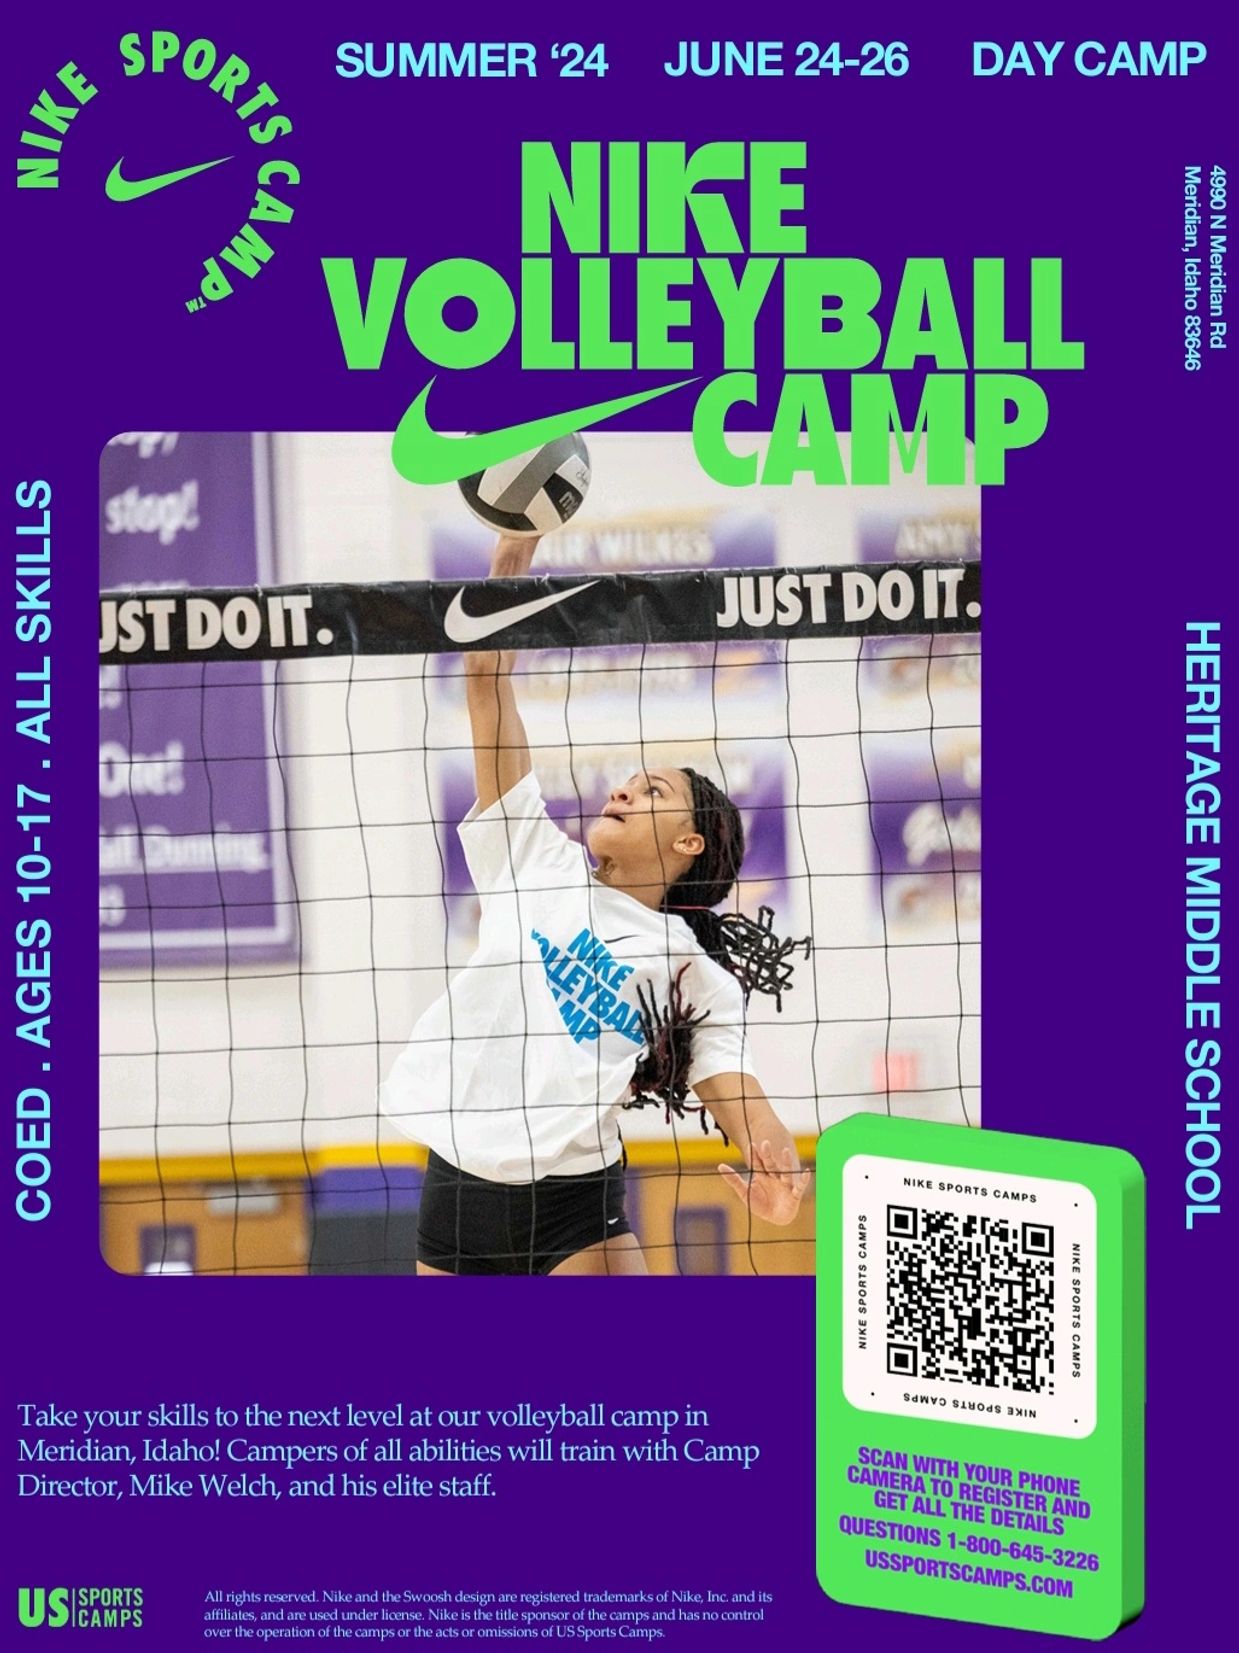 NIKE Volleyball Camp at Heritage Middle School in Meridian Idaho in the Boise Idaho area.